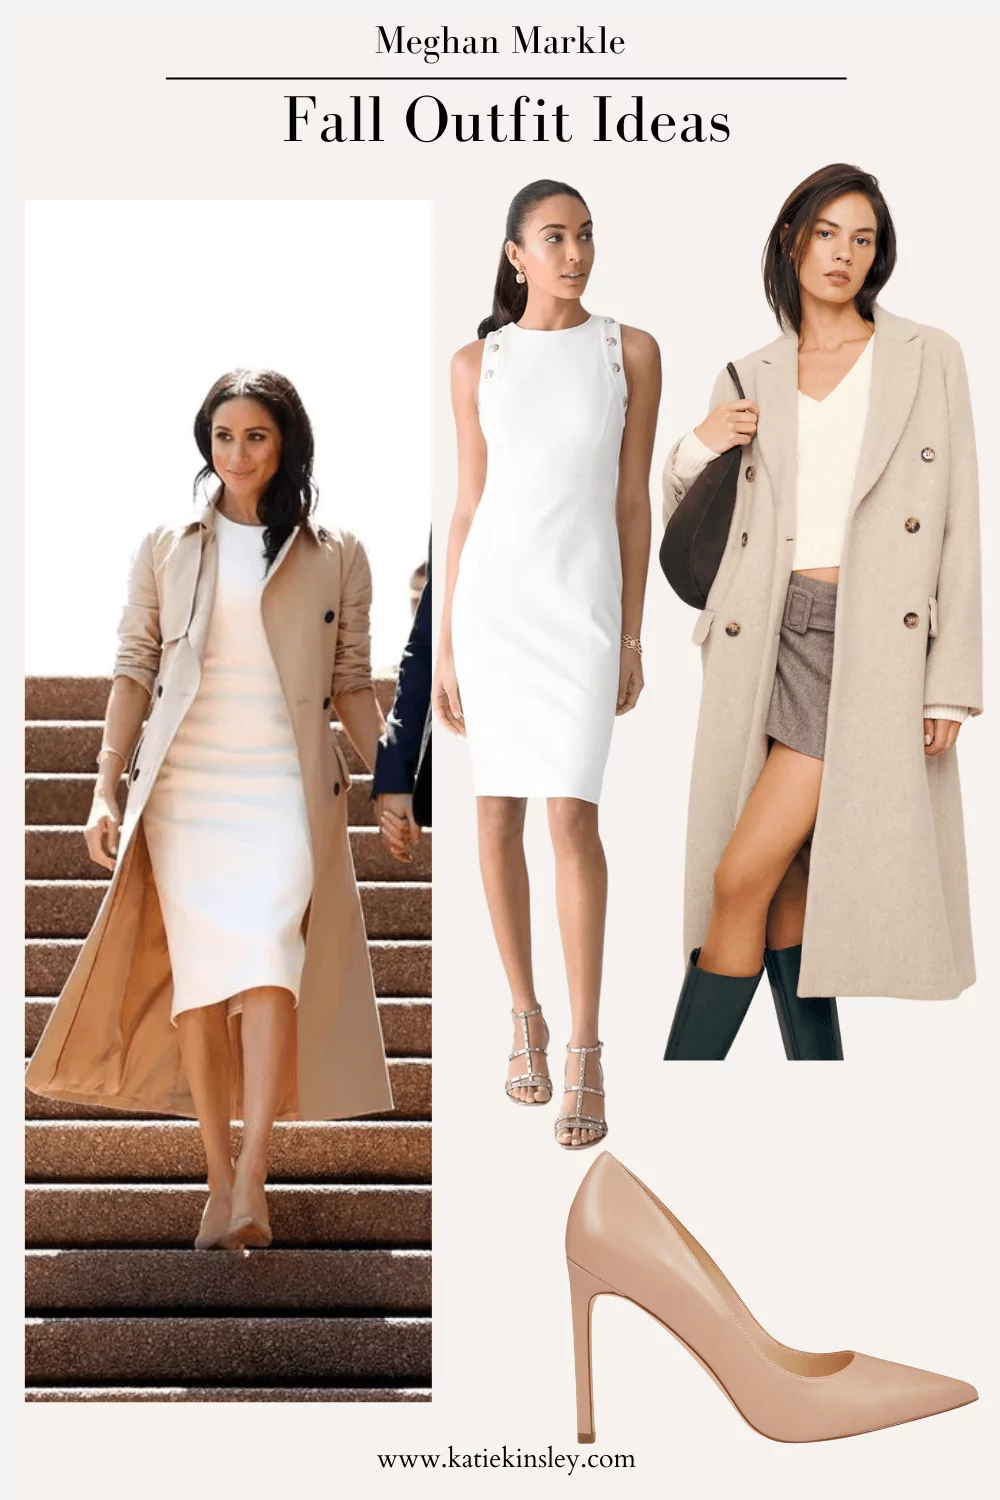 Fall Outfit ideas Meghan Markle Outfit 2